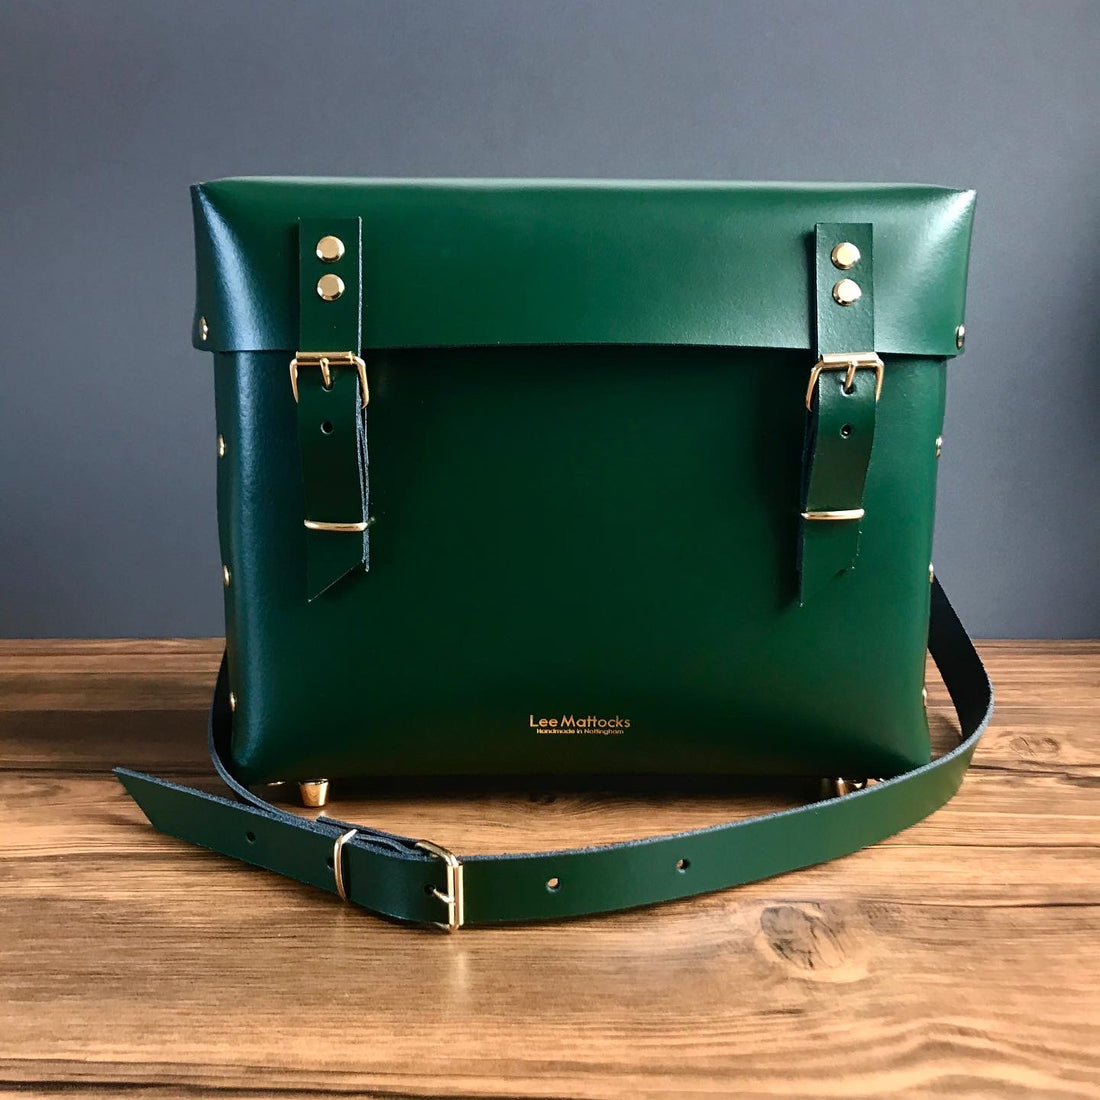 Racing green leather satchels